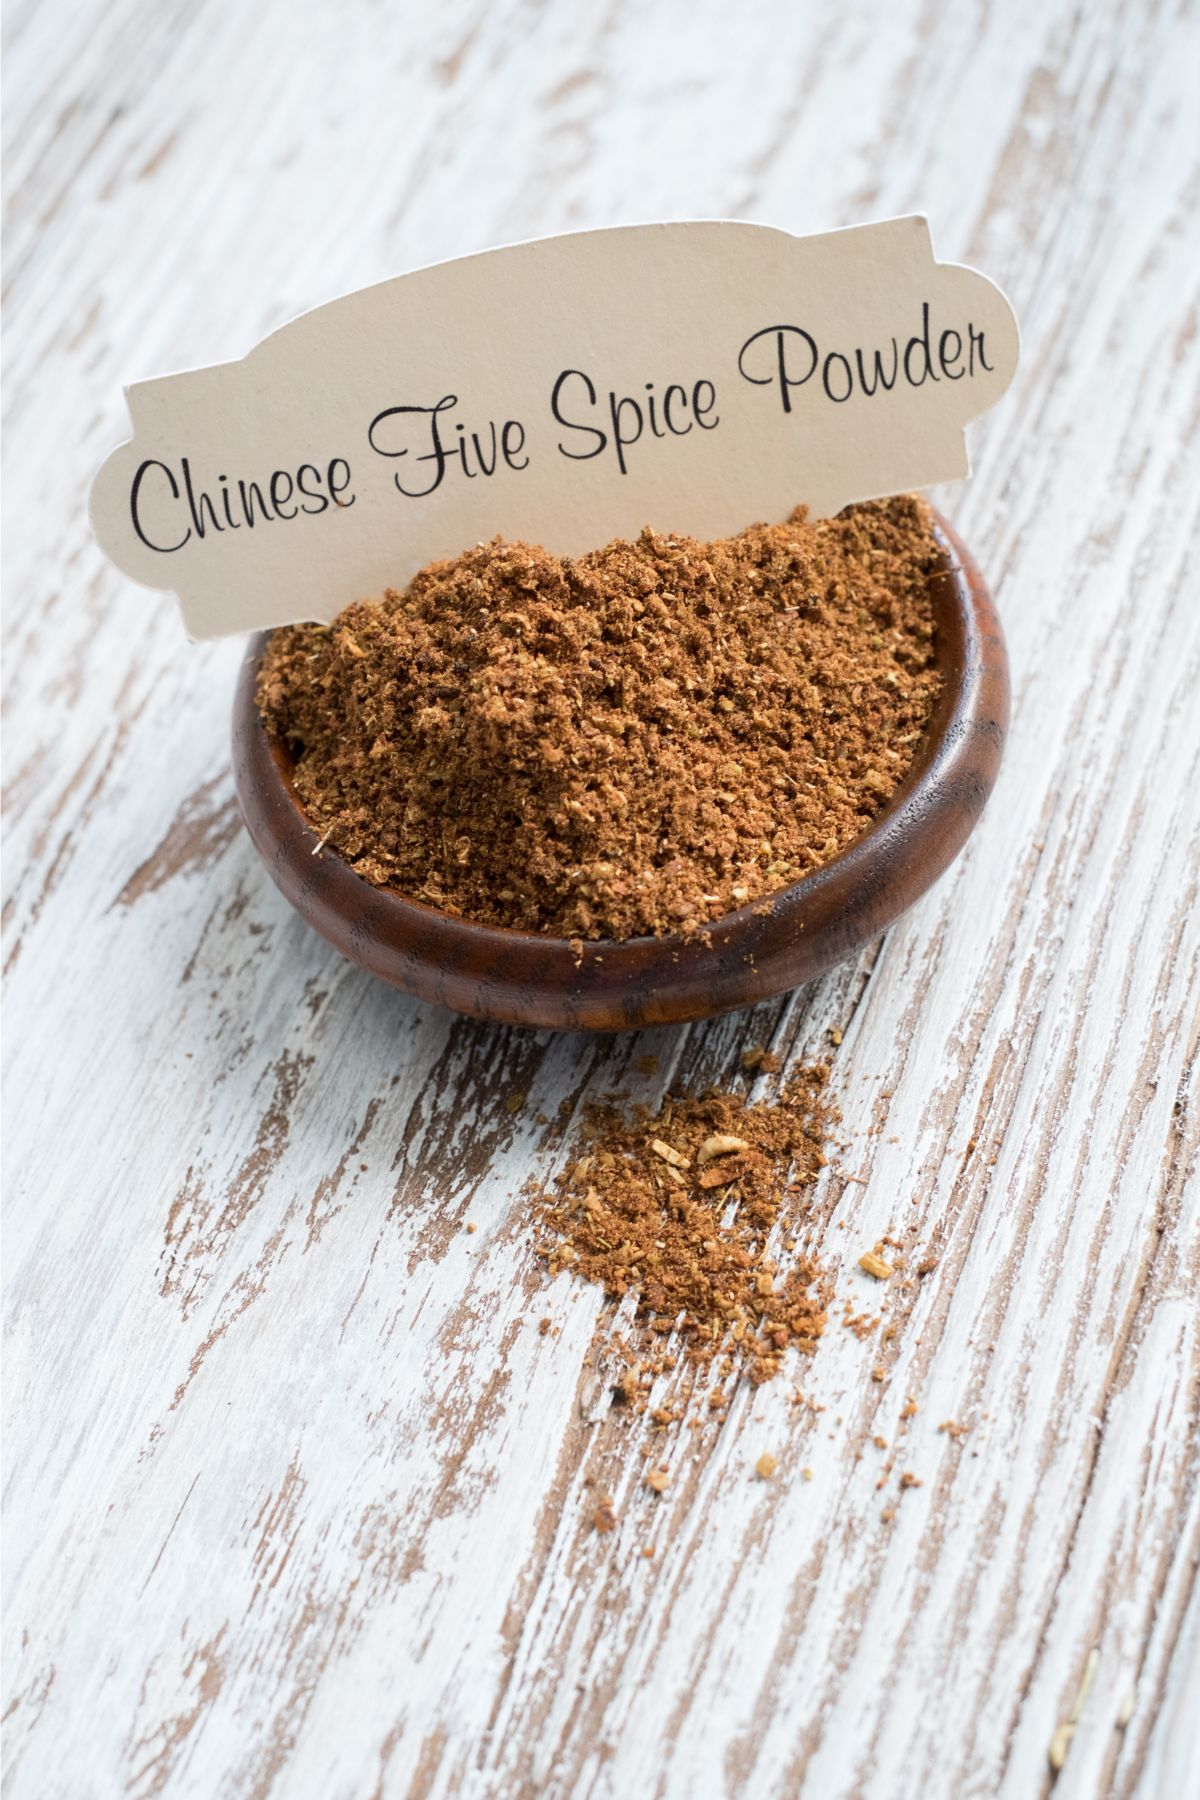 Bowl containing Chinese five spice powder seasoning.